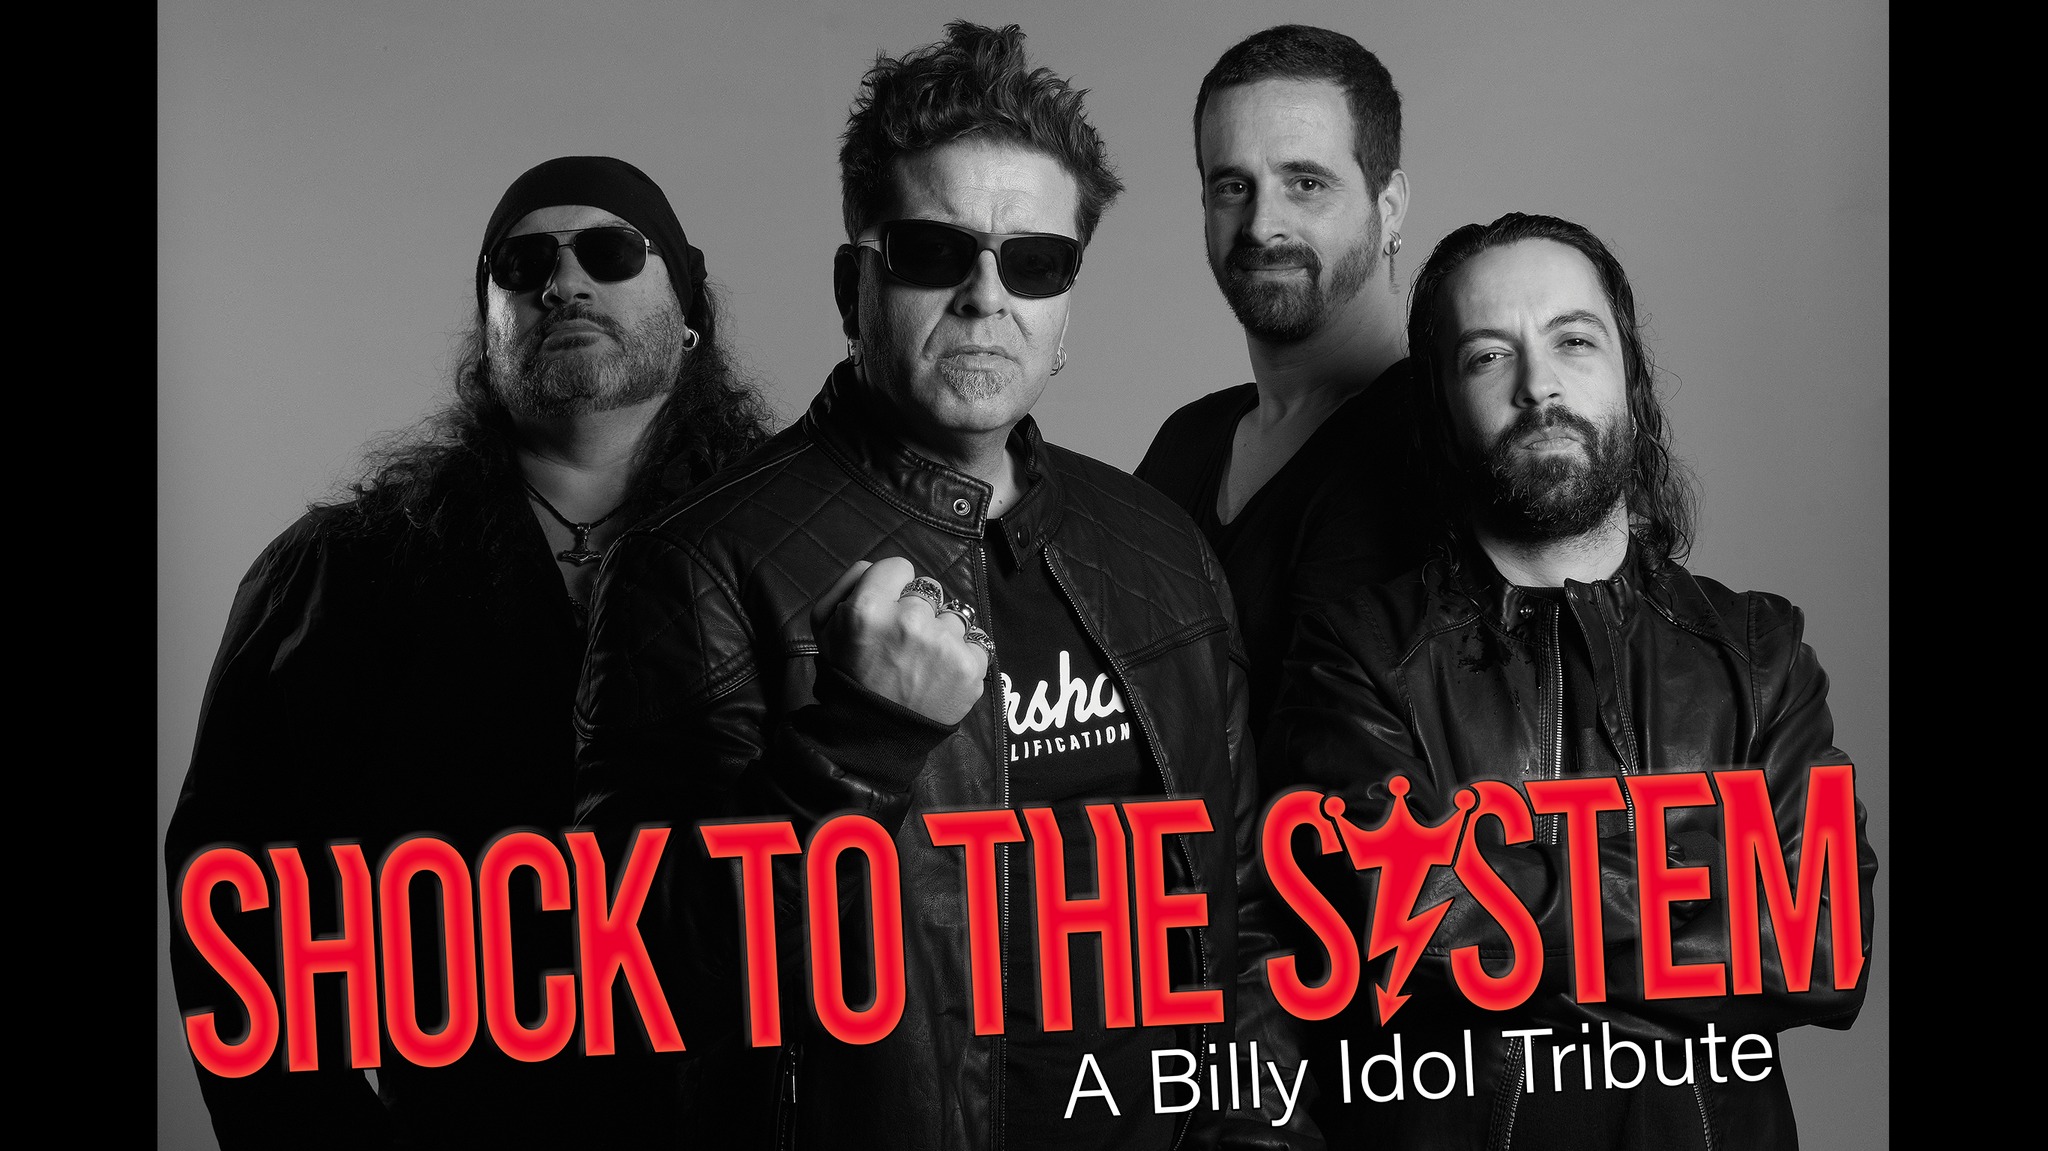 SHOCK TO THE SYSTEM - A BILLY IDOL TRIBUTE - HARD ROCK CAFE LISBOA